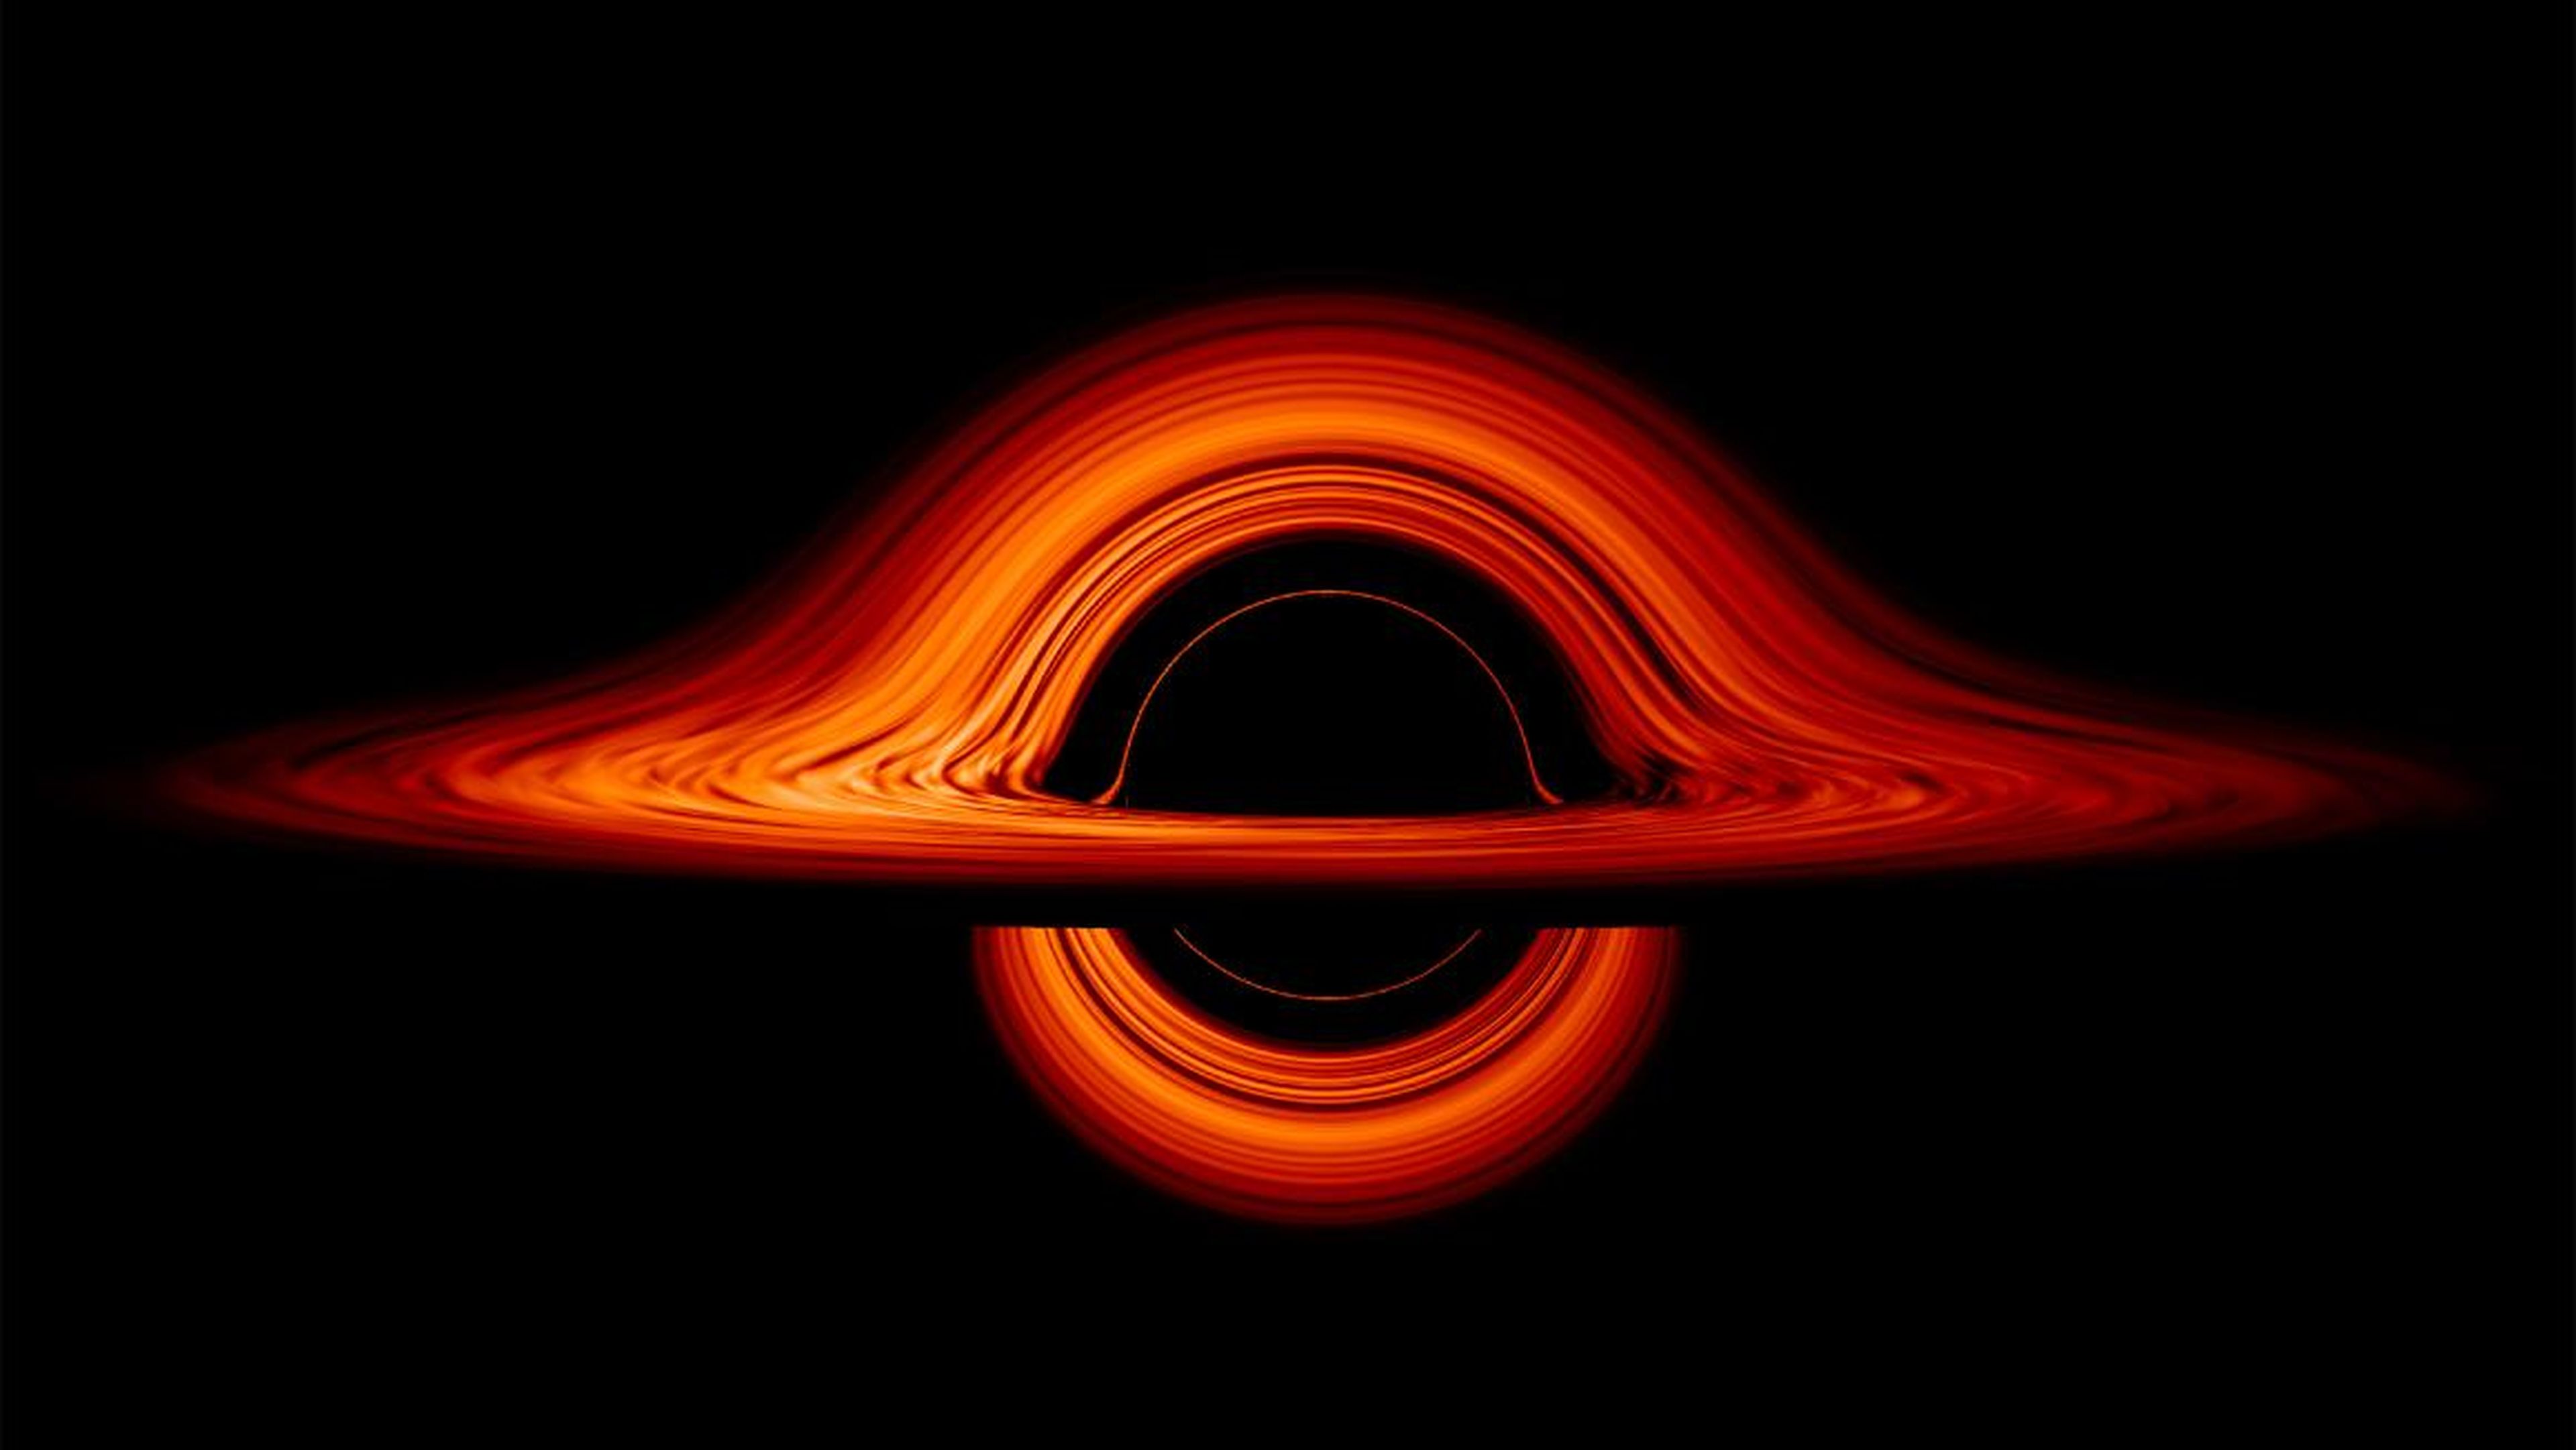 A still image of a black hole, seen from the side.